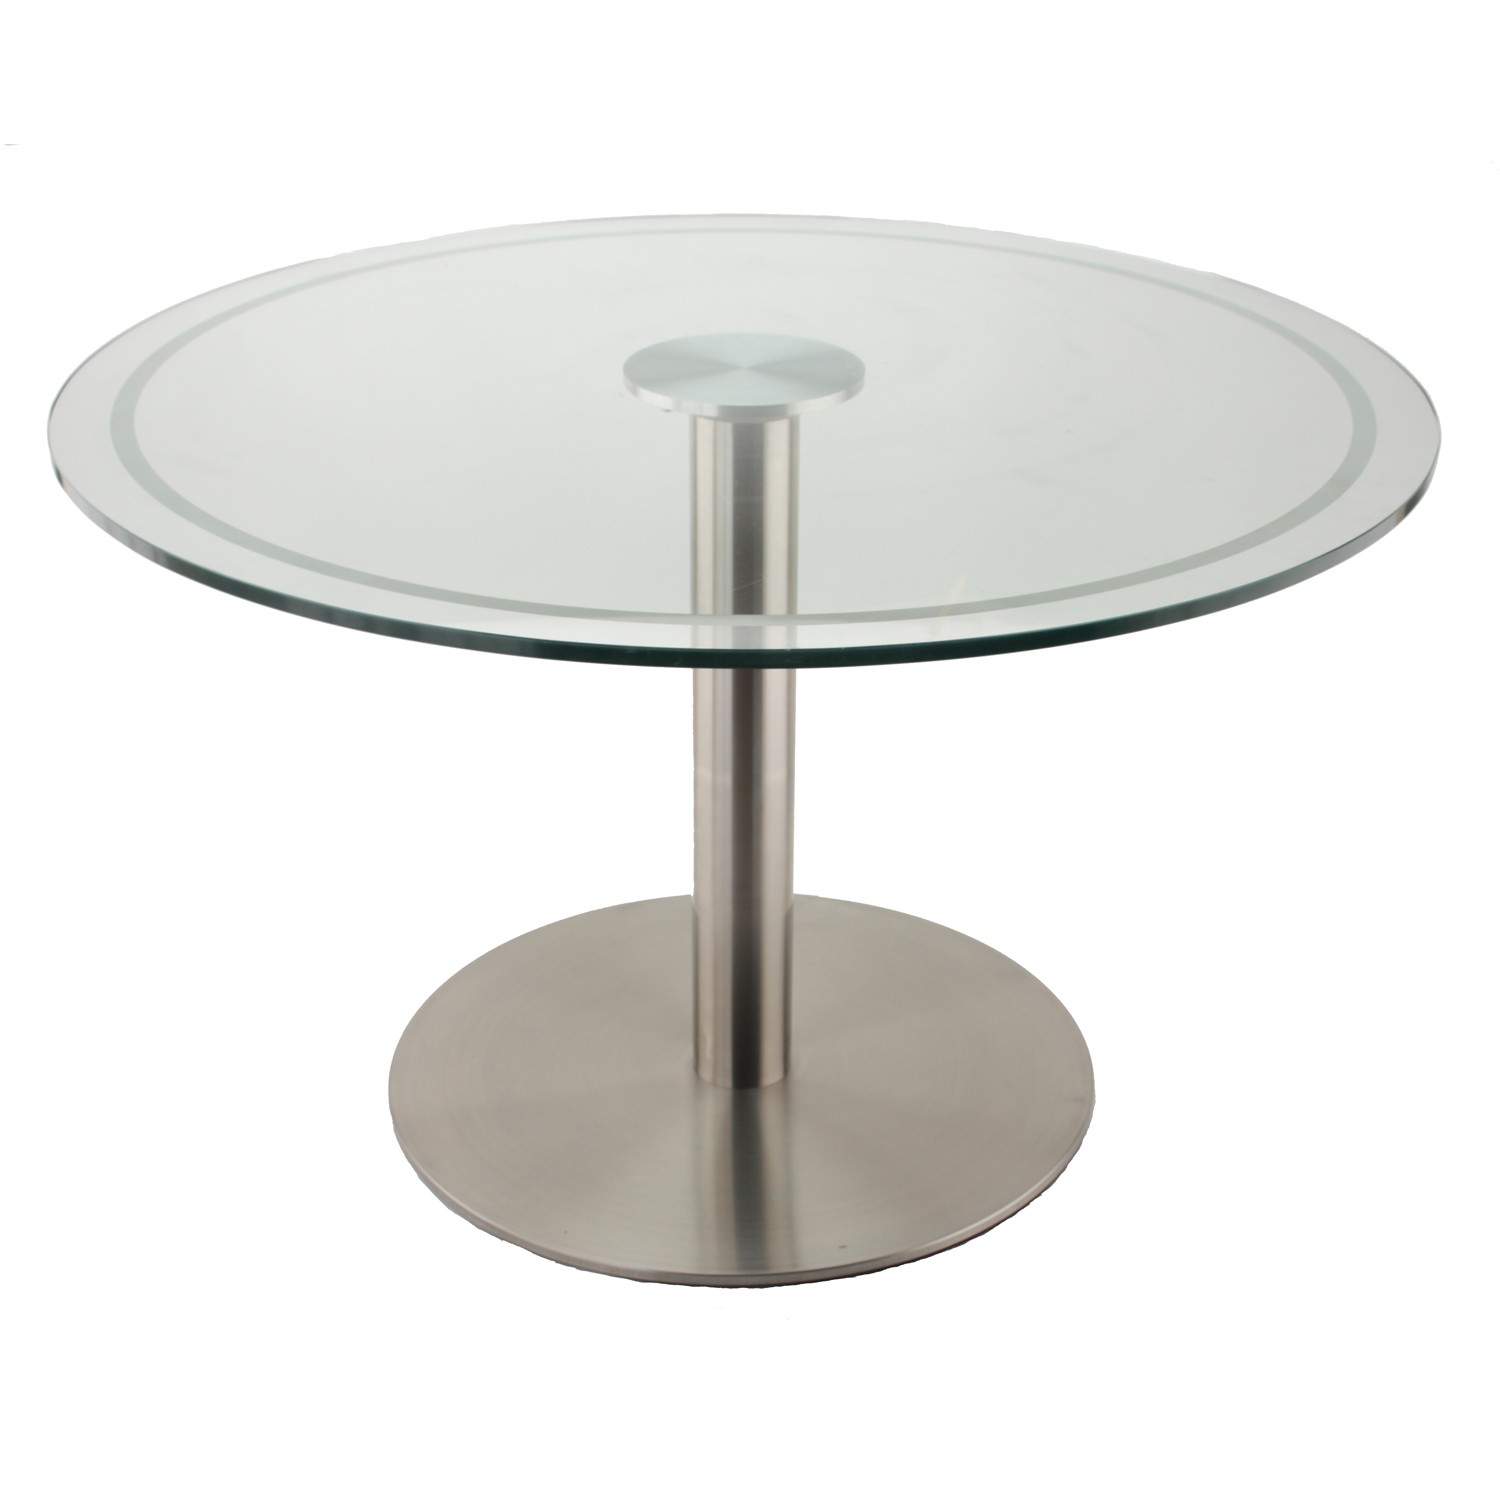 the rfl750 stainless steel table base with glass table top, using our glass ERLBGQD